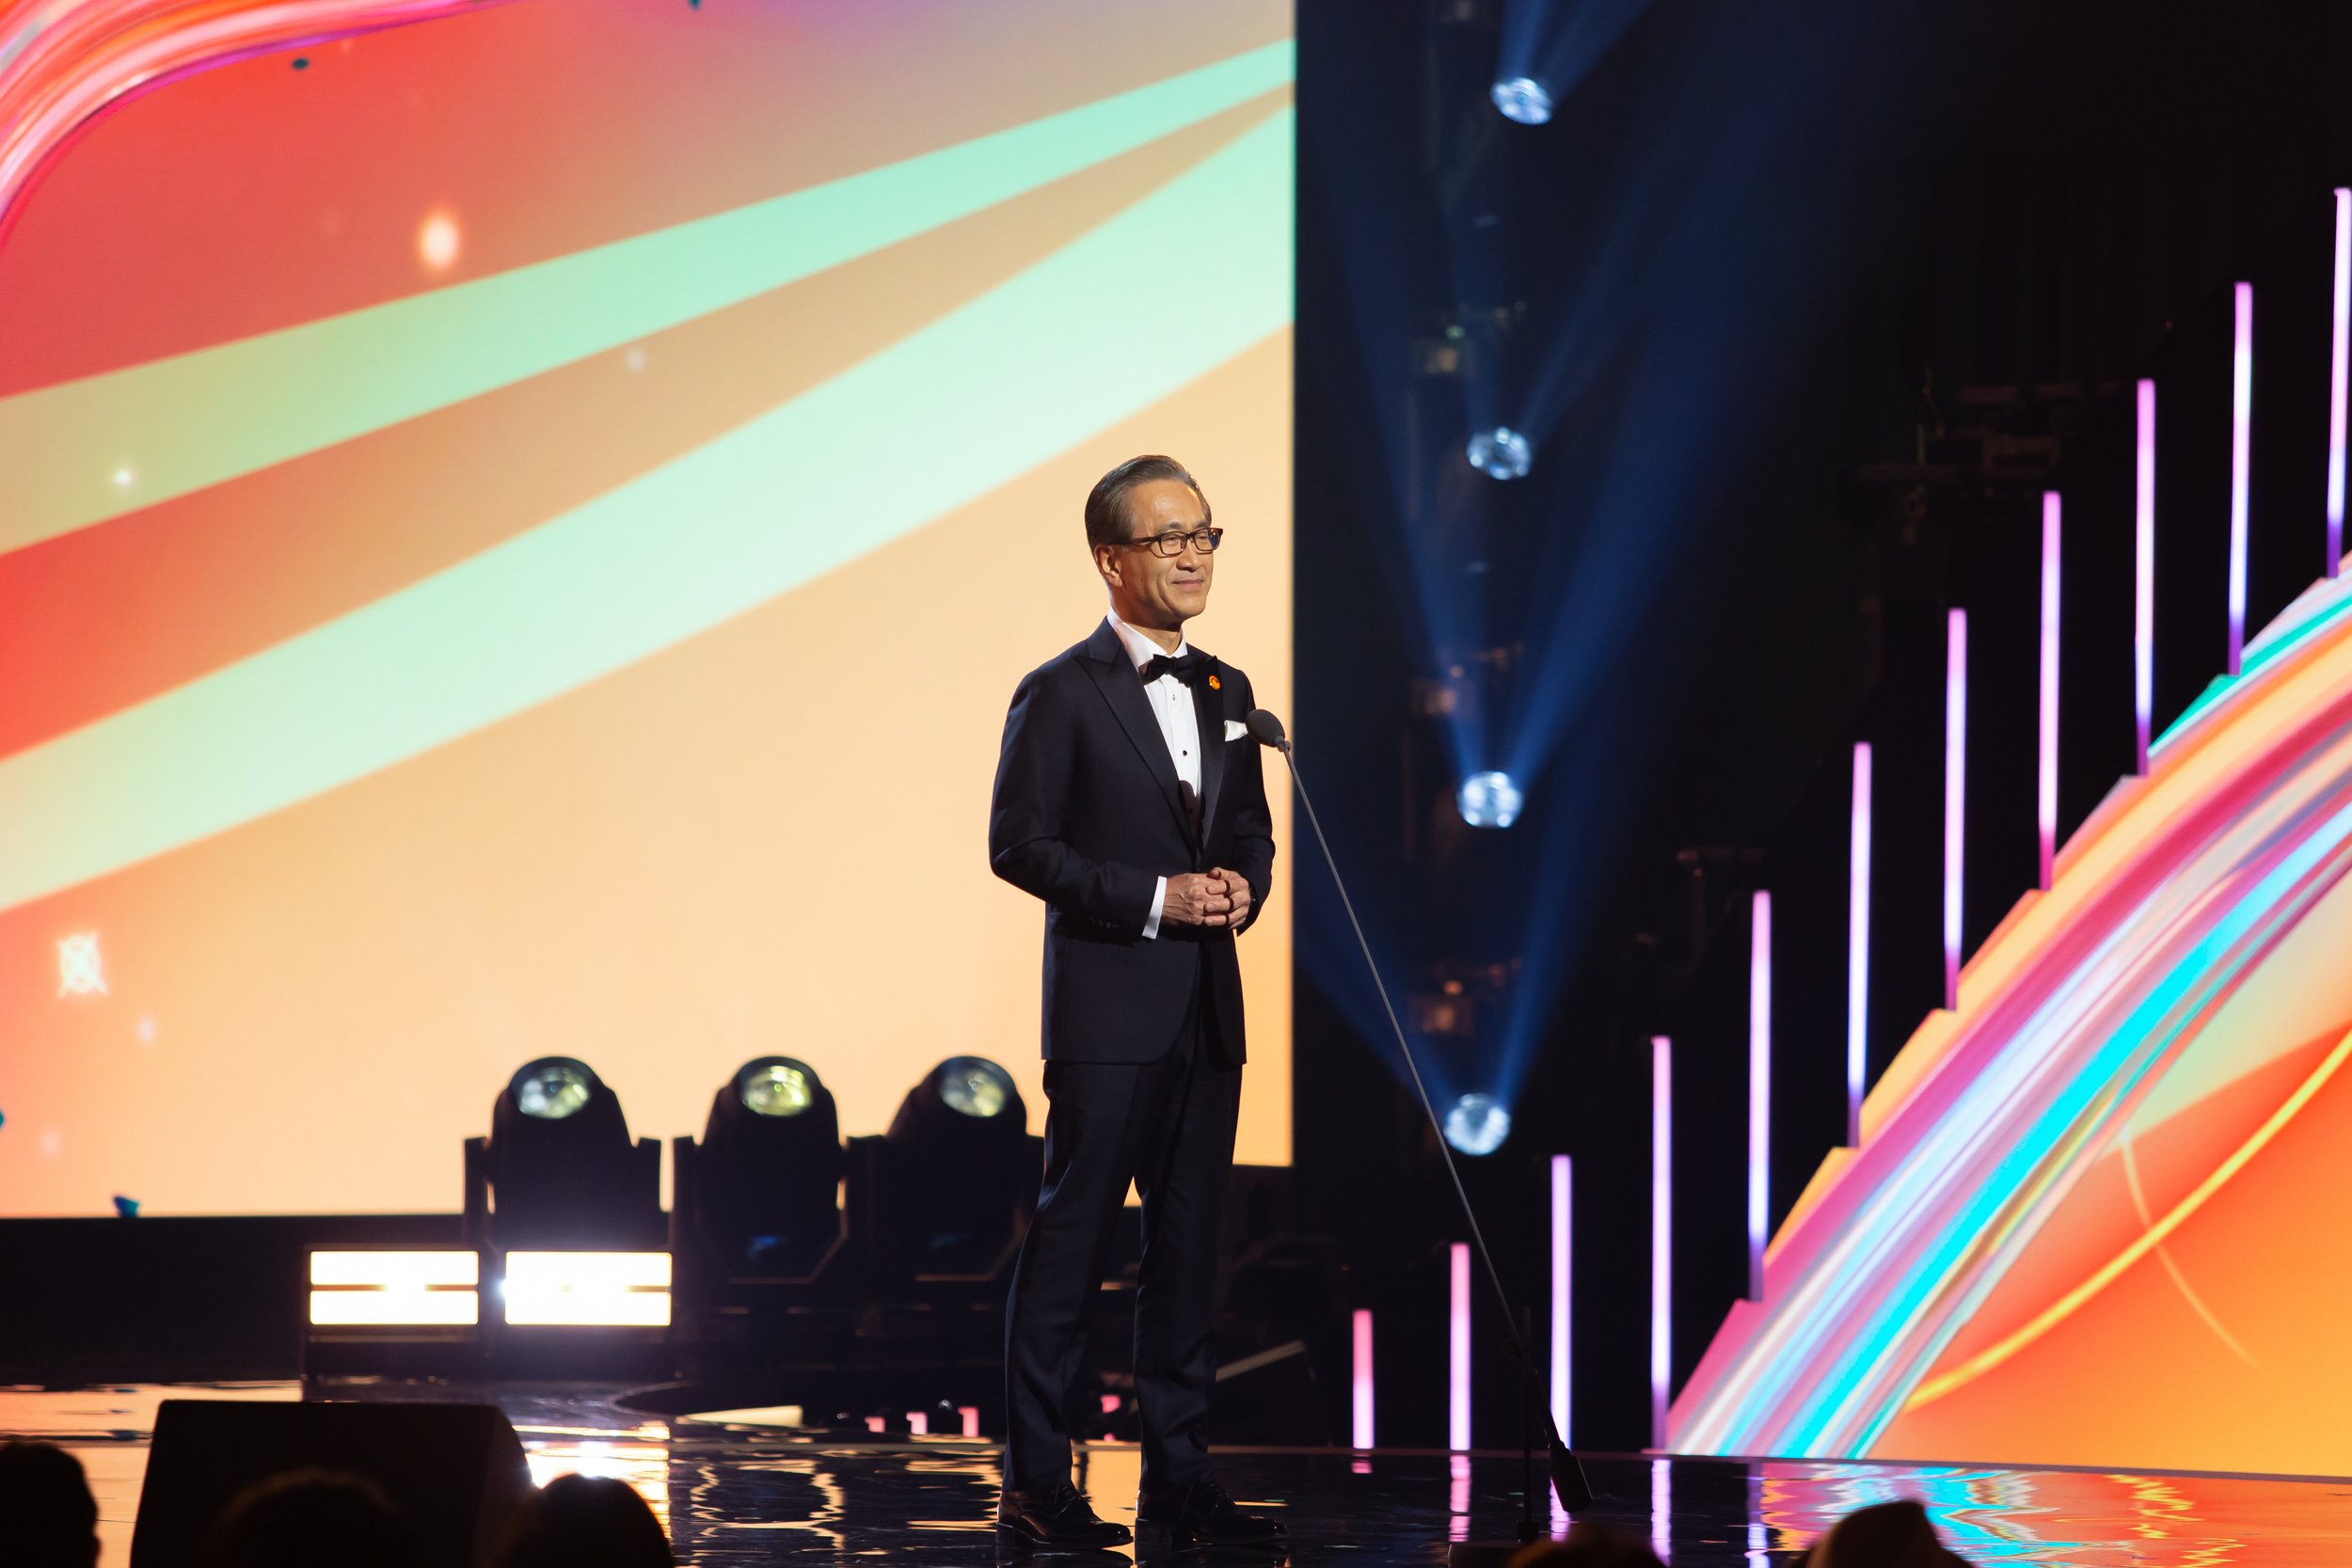 Kenichiro Yoshida, Chairman, President and CEO of Sony Group Corporation speaking at the Crunchyroll Anime Awards live from Tokyo on Saturday, March 4, 2023.jpg